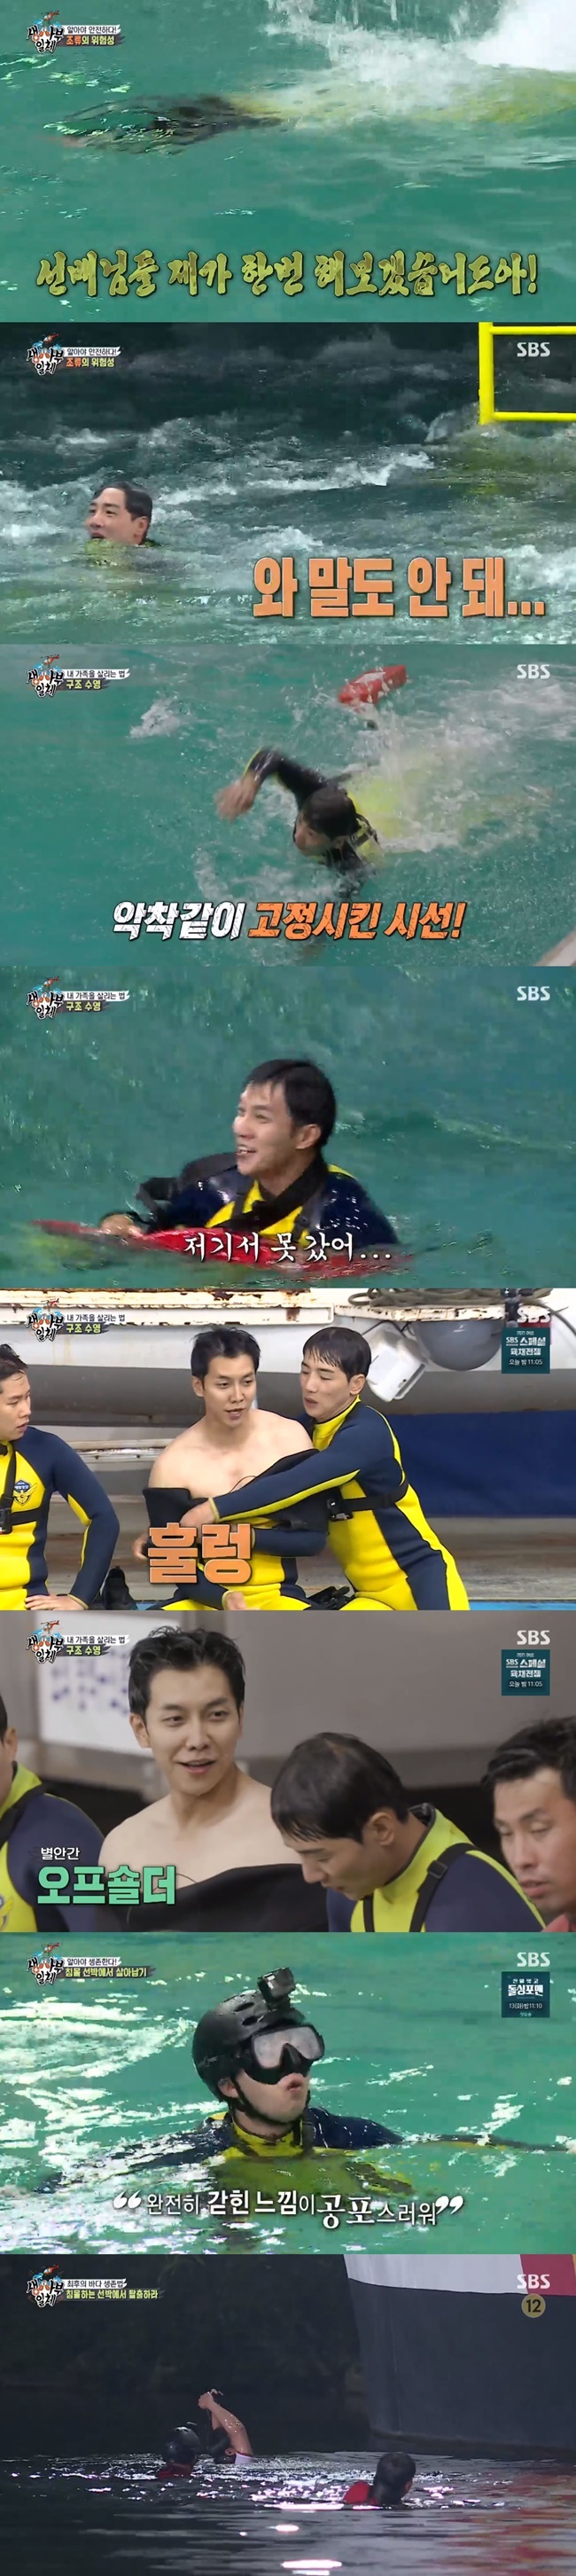 Park Gun has successfully completed rescue training, showing extraordinary judgment as a Special Warrior.On SBS All The Butlers broadcast on July 4, singer Park Gun was accompanied by a daily student with the Korean Coast Guard Master Four (4) Saidon and the last training.On this day, Chief Kim Jin-ho emphasized the danger of Algae, saying, Algae training is divided into three stages.The first stage is sooyoung possible, the second stage is difficult to catch the structure, and the third stage is the level where the body flies like Superman when the structure is caught. The disciples entered the underwater training ground with the help of the Korean Coast Guard masters to directly experience the danger of Algae.Kim Dong-Hyun, a Marines native, was lurking in the early days, but gradually Algaes resistance began to grow and became a sooyoung.Park Gun, a special warrior, wanted to go farther than Kim Dong-Hyun, but soon was blocked by Algae resistance.Seo Dong-cheol said, We have to fix our eyes on the rescuer.It is important to approach the victims by constantly checking the victims, not just looking at the bottom and seeing the waves. In the training of the difficulty phase () structure Sooyoung, Sgt. Seo Dong-cheol rescued the victims in just 52 seconds.In addition, the disciples took on the role of rescuer in the first phase of Algae; Park Gun succeeded in the rescue of the demanding party (Kim Dong-Hyun) in just 1:37.Lee Seung-gi, on the other hand, faced a difficult time with life-saving tool strings tangled in his arms, rather than moving forward due to Algae.In the end, Lee Seung-gi failed the mission, passing the four minutes given to Golden Time.The next exercise was a ship escape drill, a way to learn how to escape when it sank on board a structure that reproduced the inside of the ship.If the water rises to the neck, you can escape to the opposite circle, said Kim Jin-ho. There is an obstacle inside the ship, so you should avoid it when you escape.In addition, Seo Dong-cheol advised, It is important to set the standard when you actually escape. Set one direction and go out along the wall along the light.In addition, Kim Jin-ho said, Remember SBS. He said, Stop stop, Breathe Breathe and Solution.As the first runner, Park Gun calmly managed to escape; Kim Dong-Hyun, before entering the simulator, complained of fear that he was already a little scared.I think people would be scared (not me), said Park Gun, who saw it, laughing, as if it were the ghost-catching Marines. Kim Dong-Hyun excused, I think people would be scared.In the final exercise, the members moved to a mock ship training ground modeled after a 500-ton ship; the disciples began training in ship sinking on a simulated ship.Summoned to a simulated ship that suddenly tilted to 20 degrees, the disciples appealed dizzy, sick, and scary.The disciples gathered on the sinking ship deck and attempted to escape. Lieutenant Jeon Myung-gun encouraged them to have confidence that you can all do it.Park Gun and Lee Seung-gi, from Special Warrior, succeeded in this without a single hesitation; Kim Dong-Hyun directed the two men, Water cold?, causing a laugh.